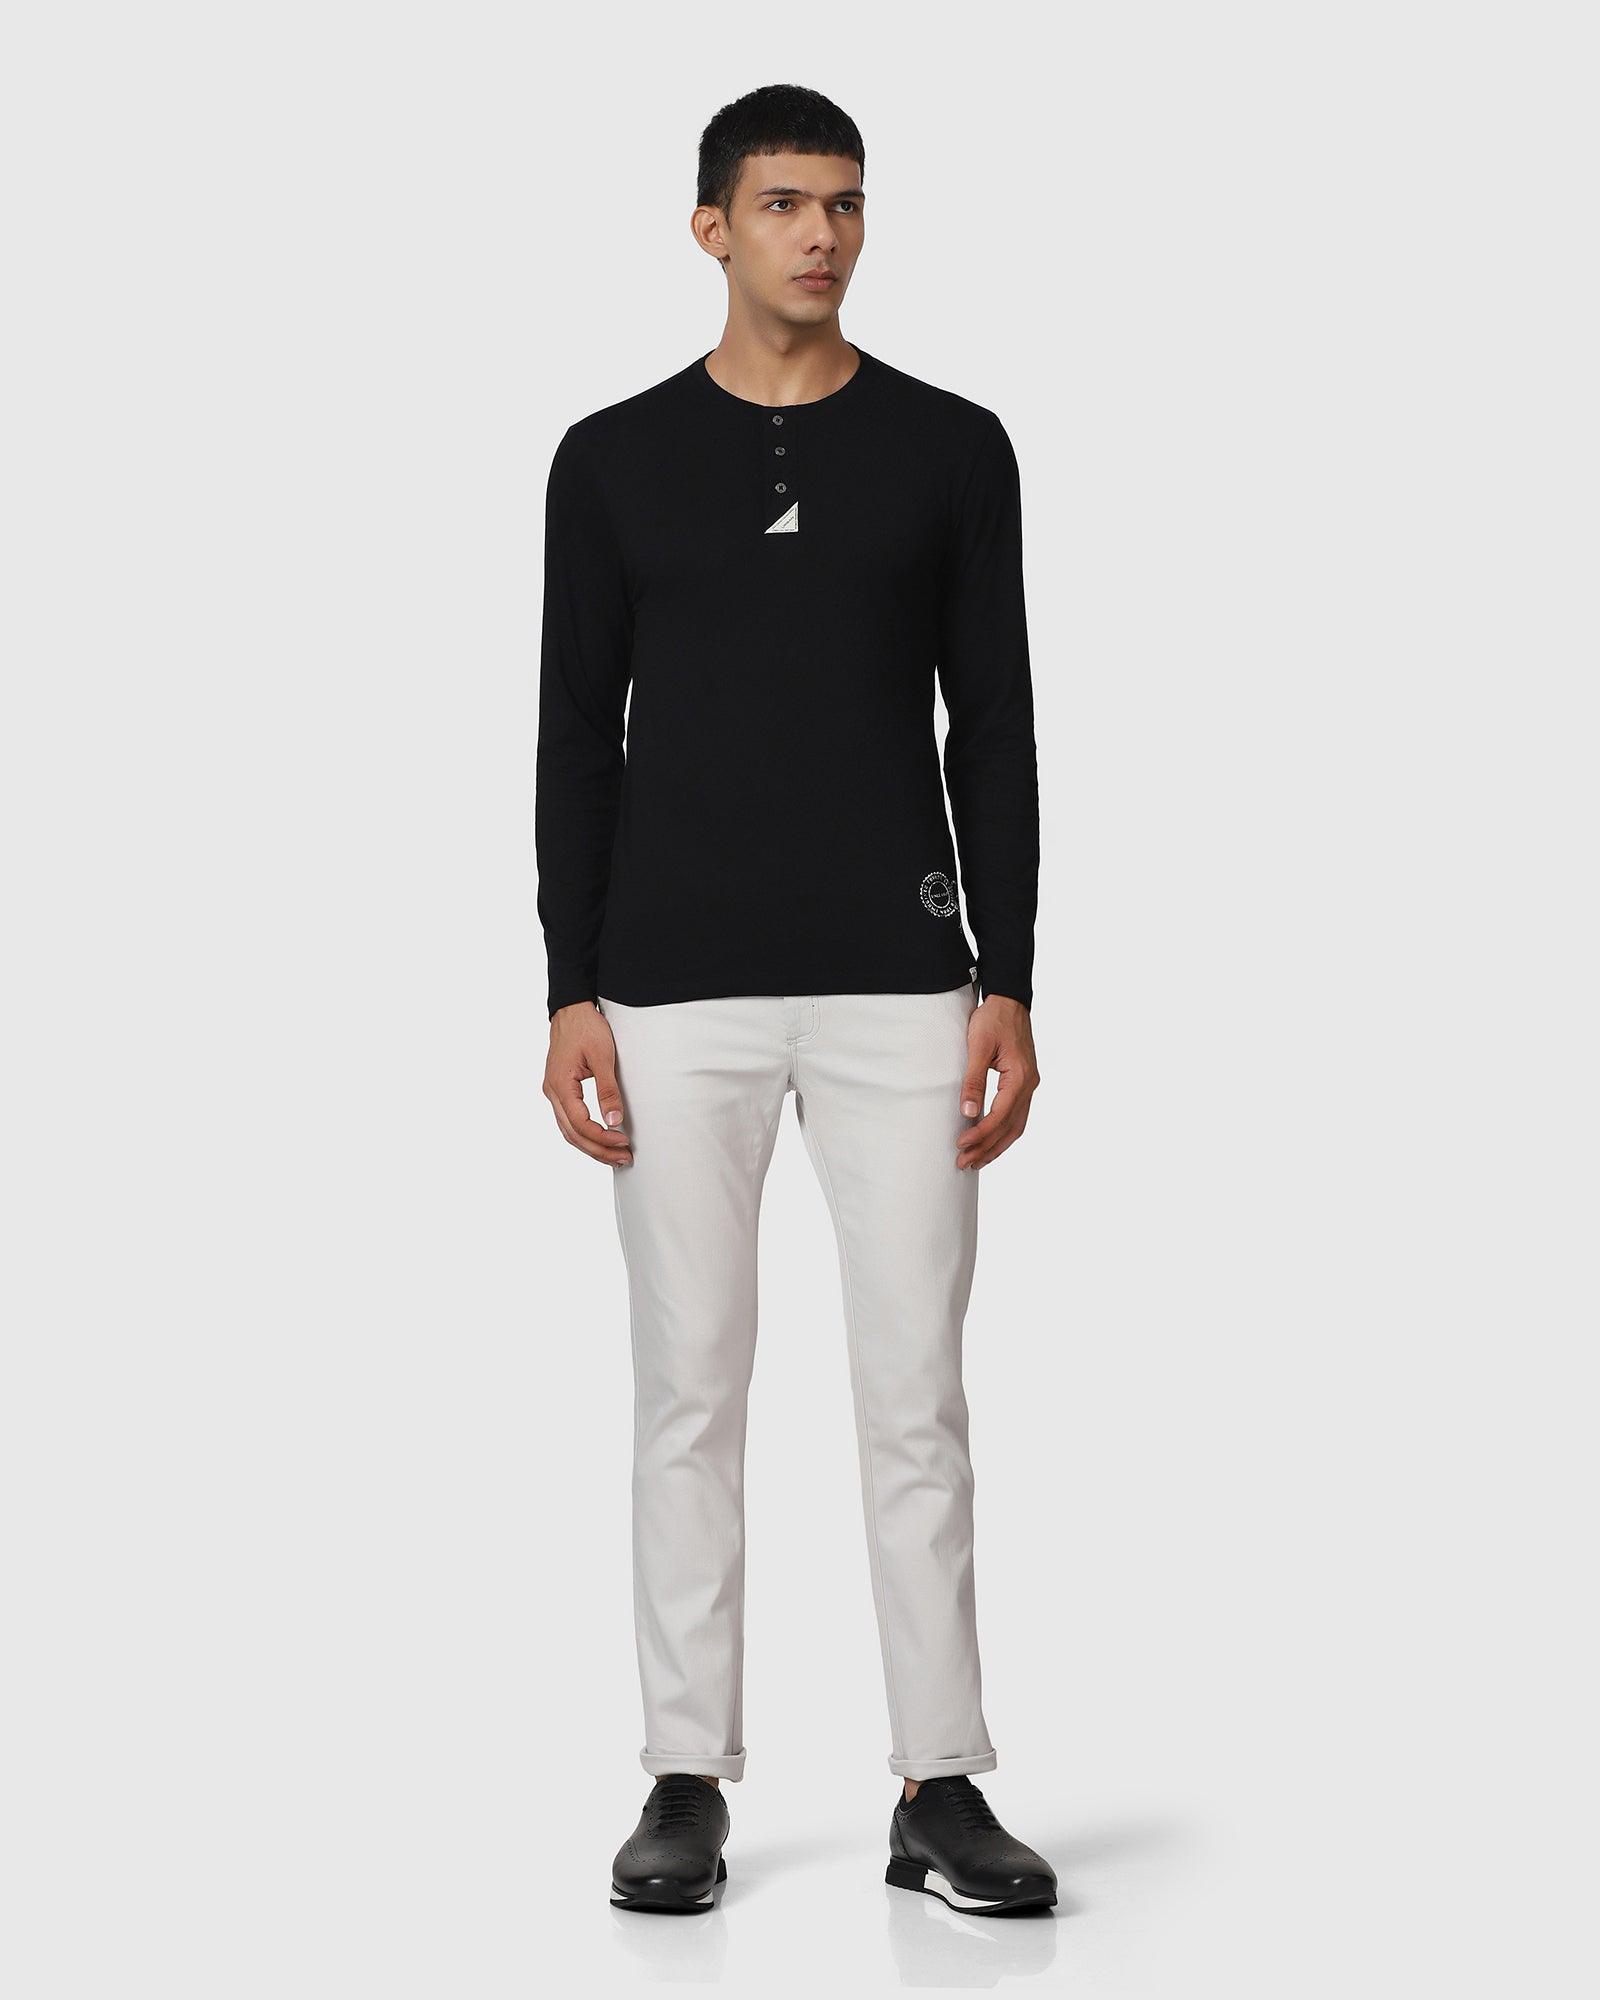 Henley Collar Black Solid T Shirt - Leather